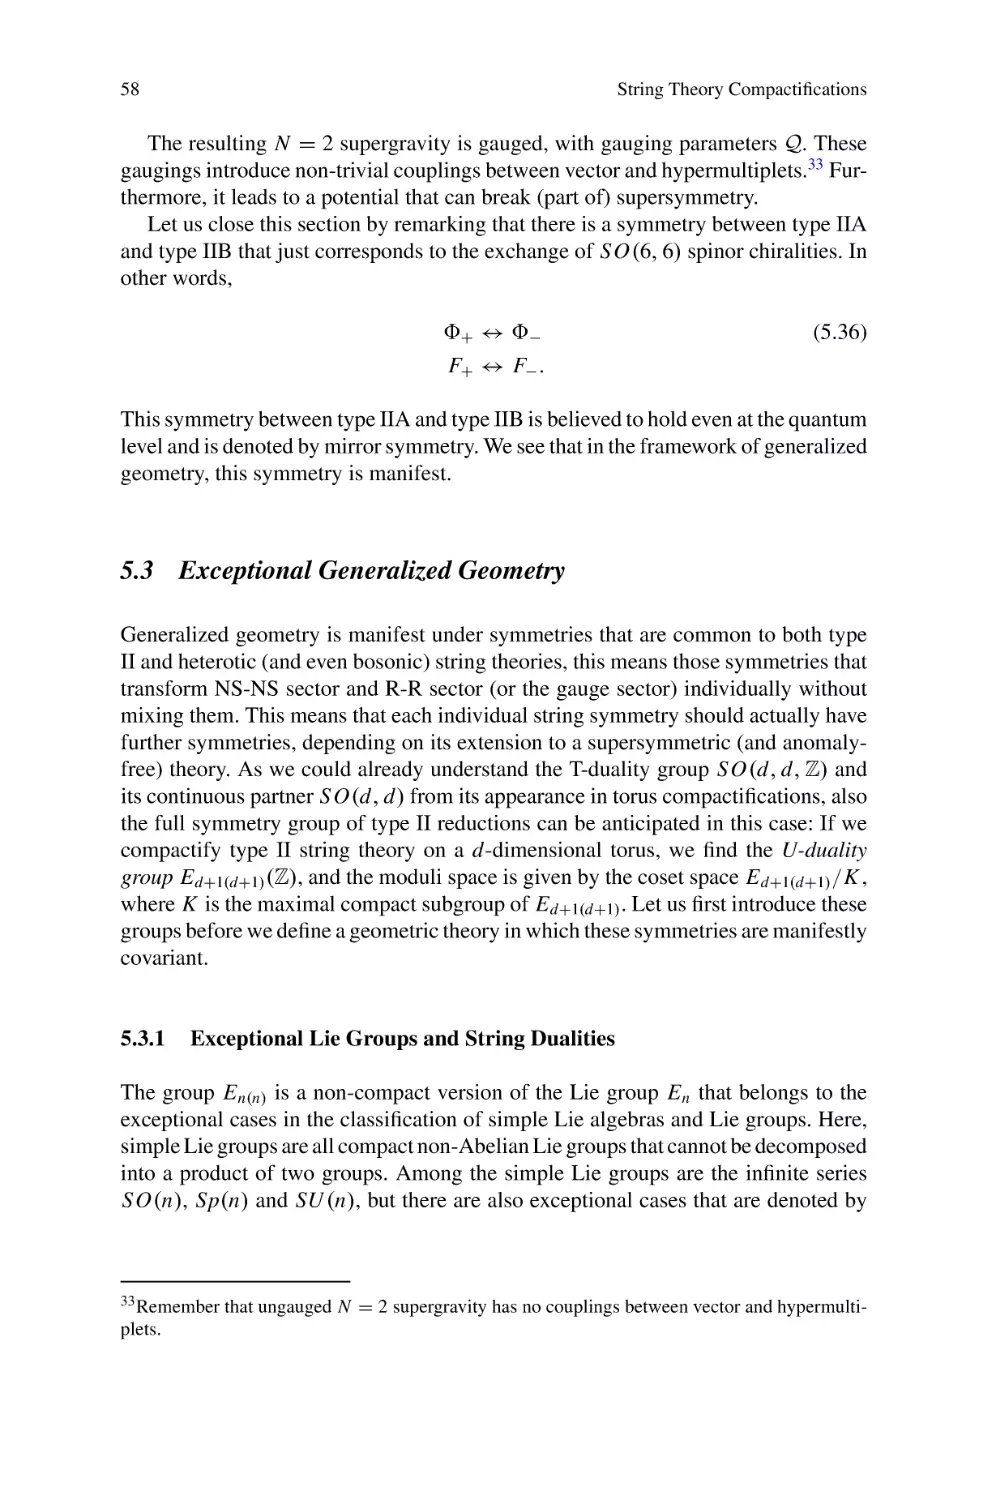 5.3 Exceptional Generalized Geometry